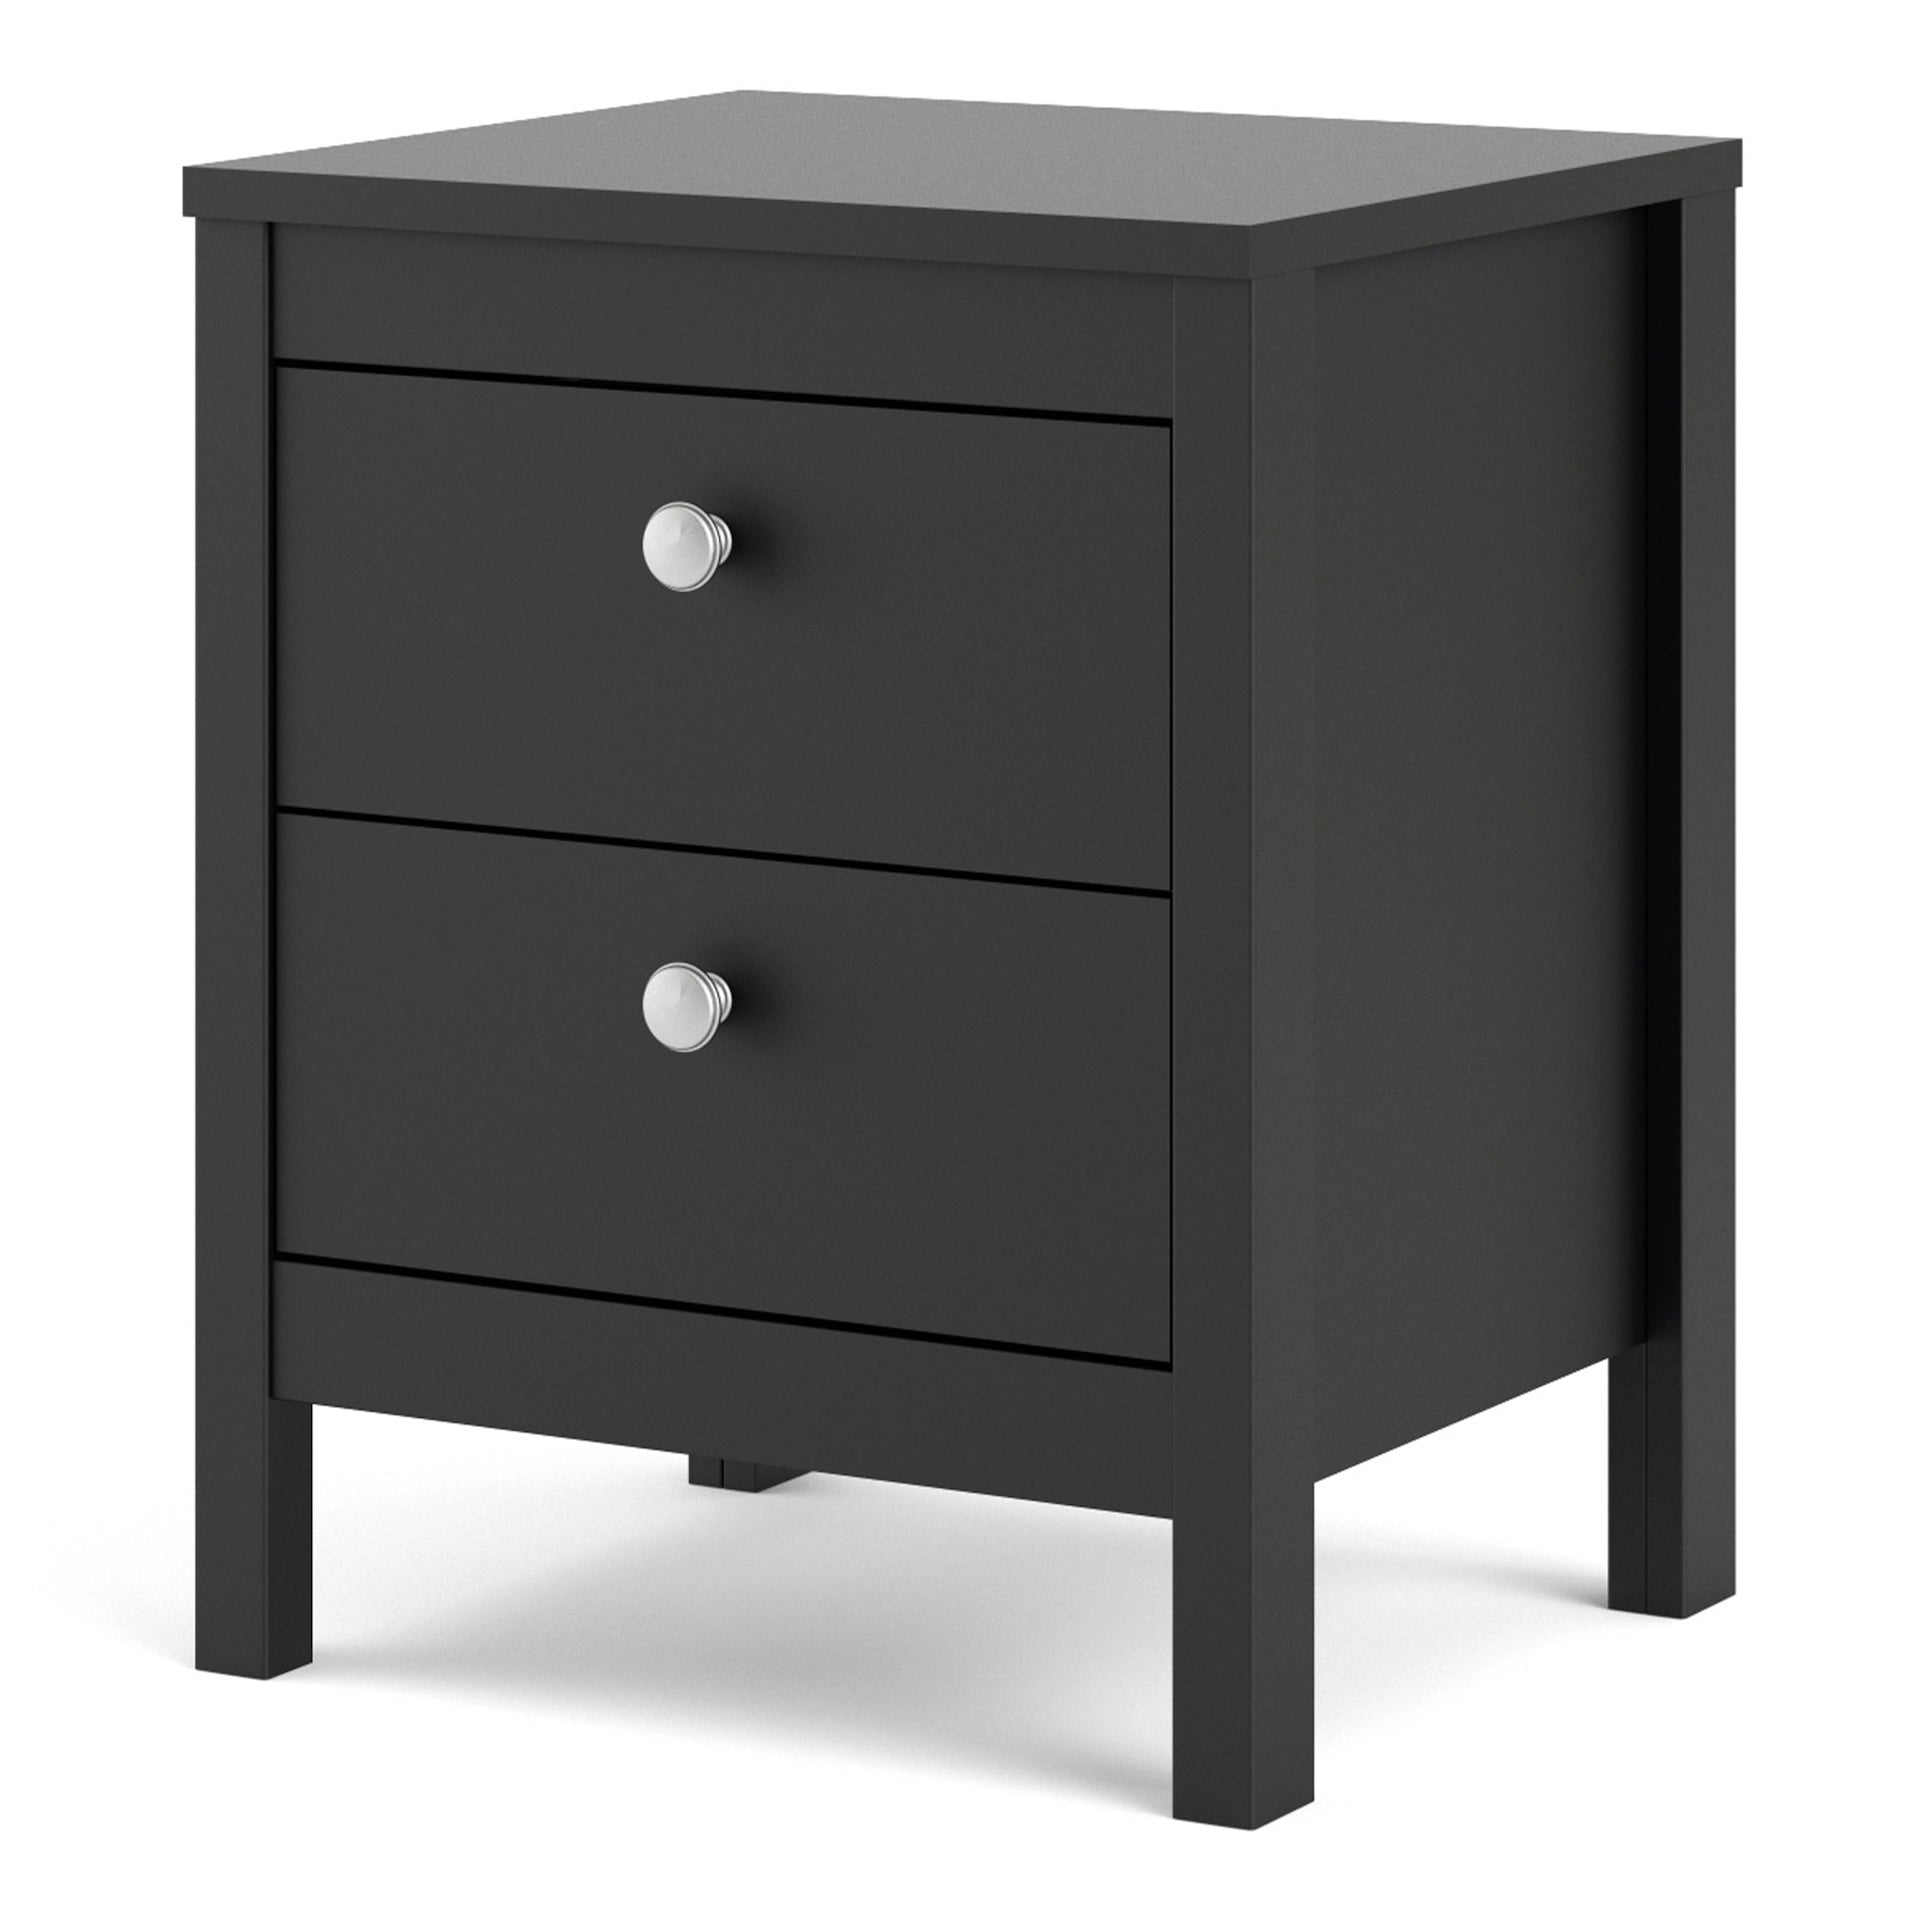 Furniture To Go Madrid Bedside Table 2 Drawers in Matt Black